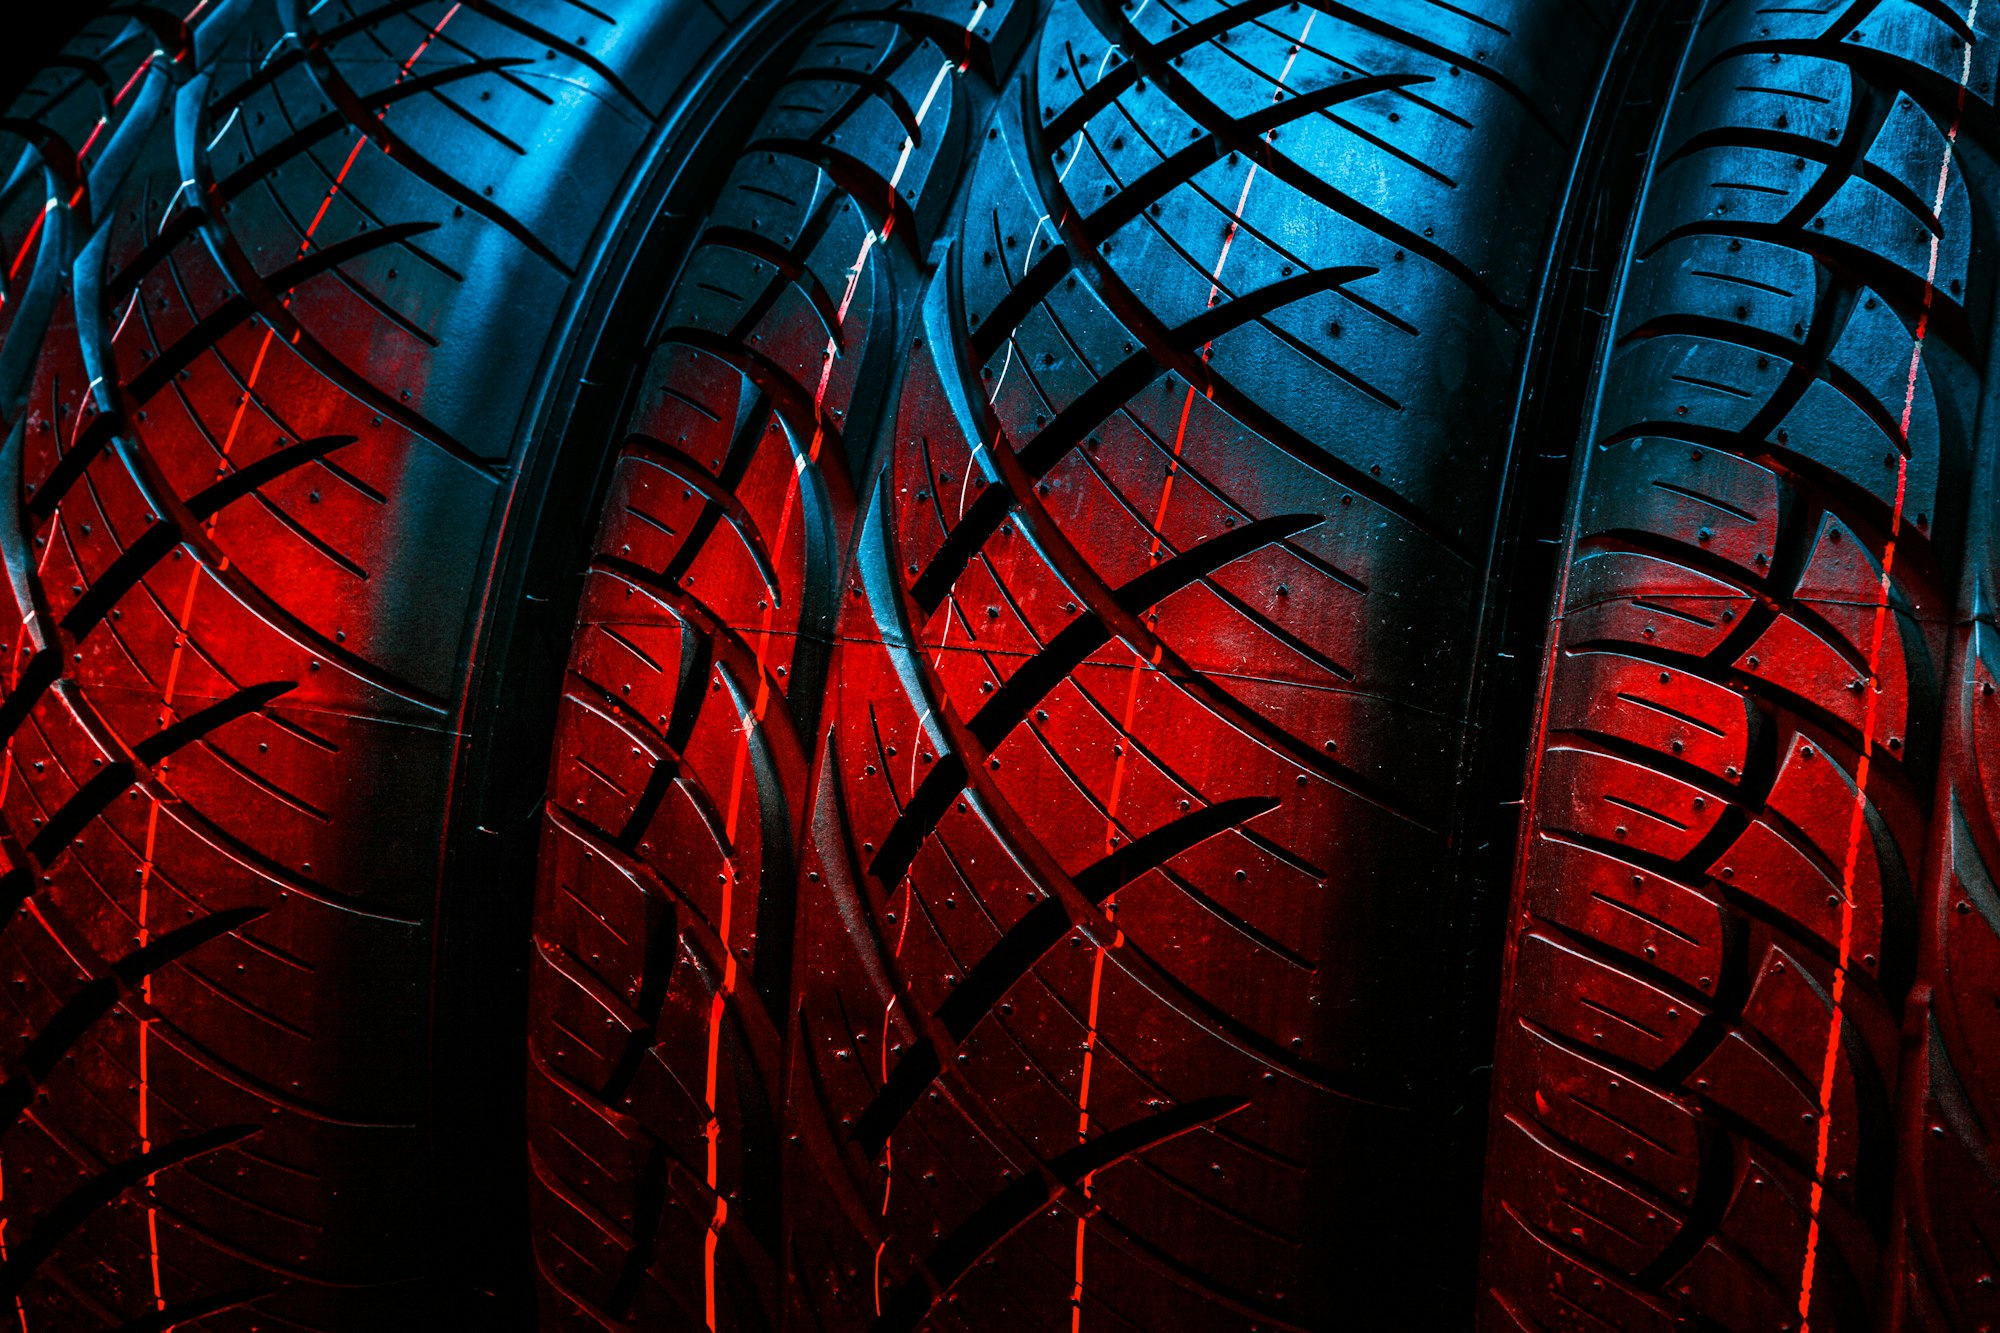 New tyres background. Car tyres close up